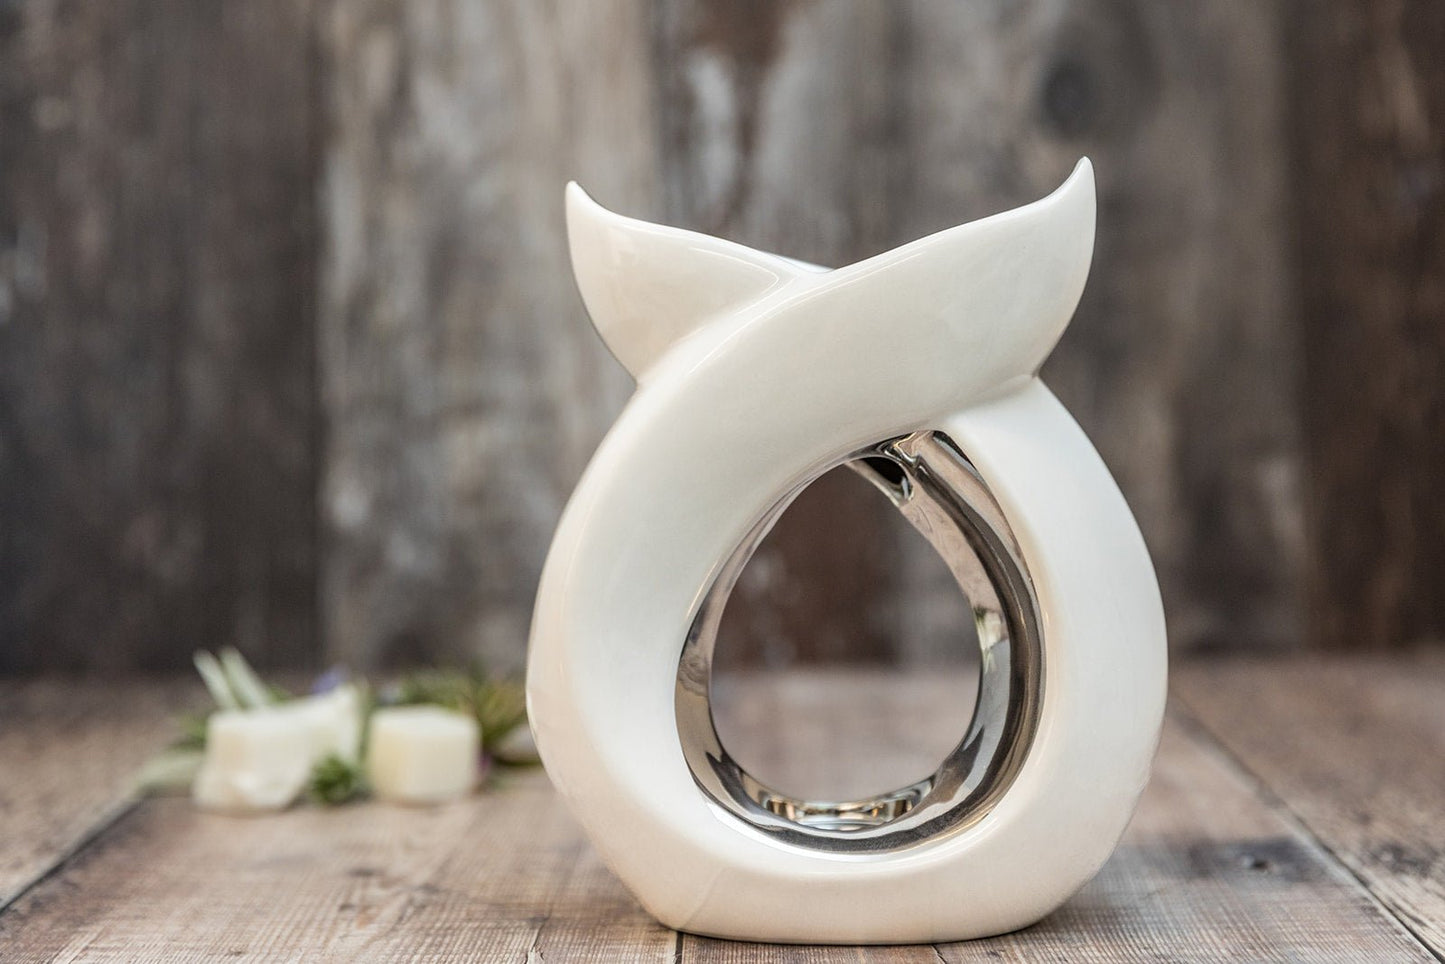 White Twist And Crossover Tea Light Wax Burner - A Melt In Time Ltd